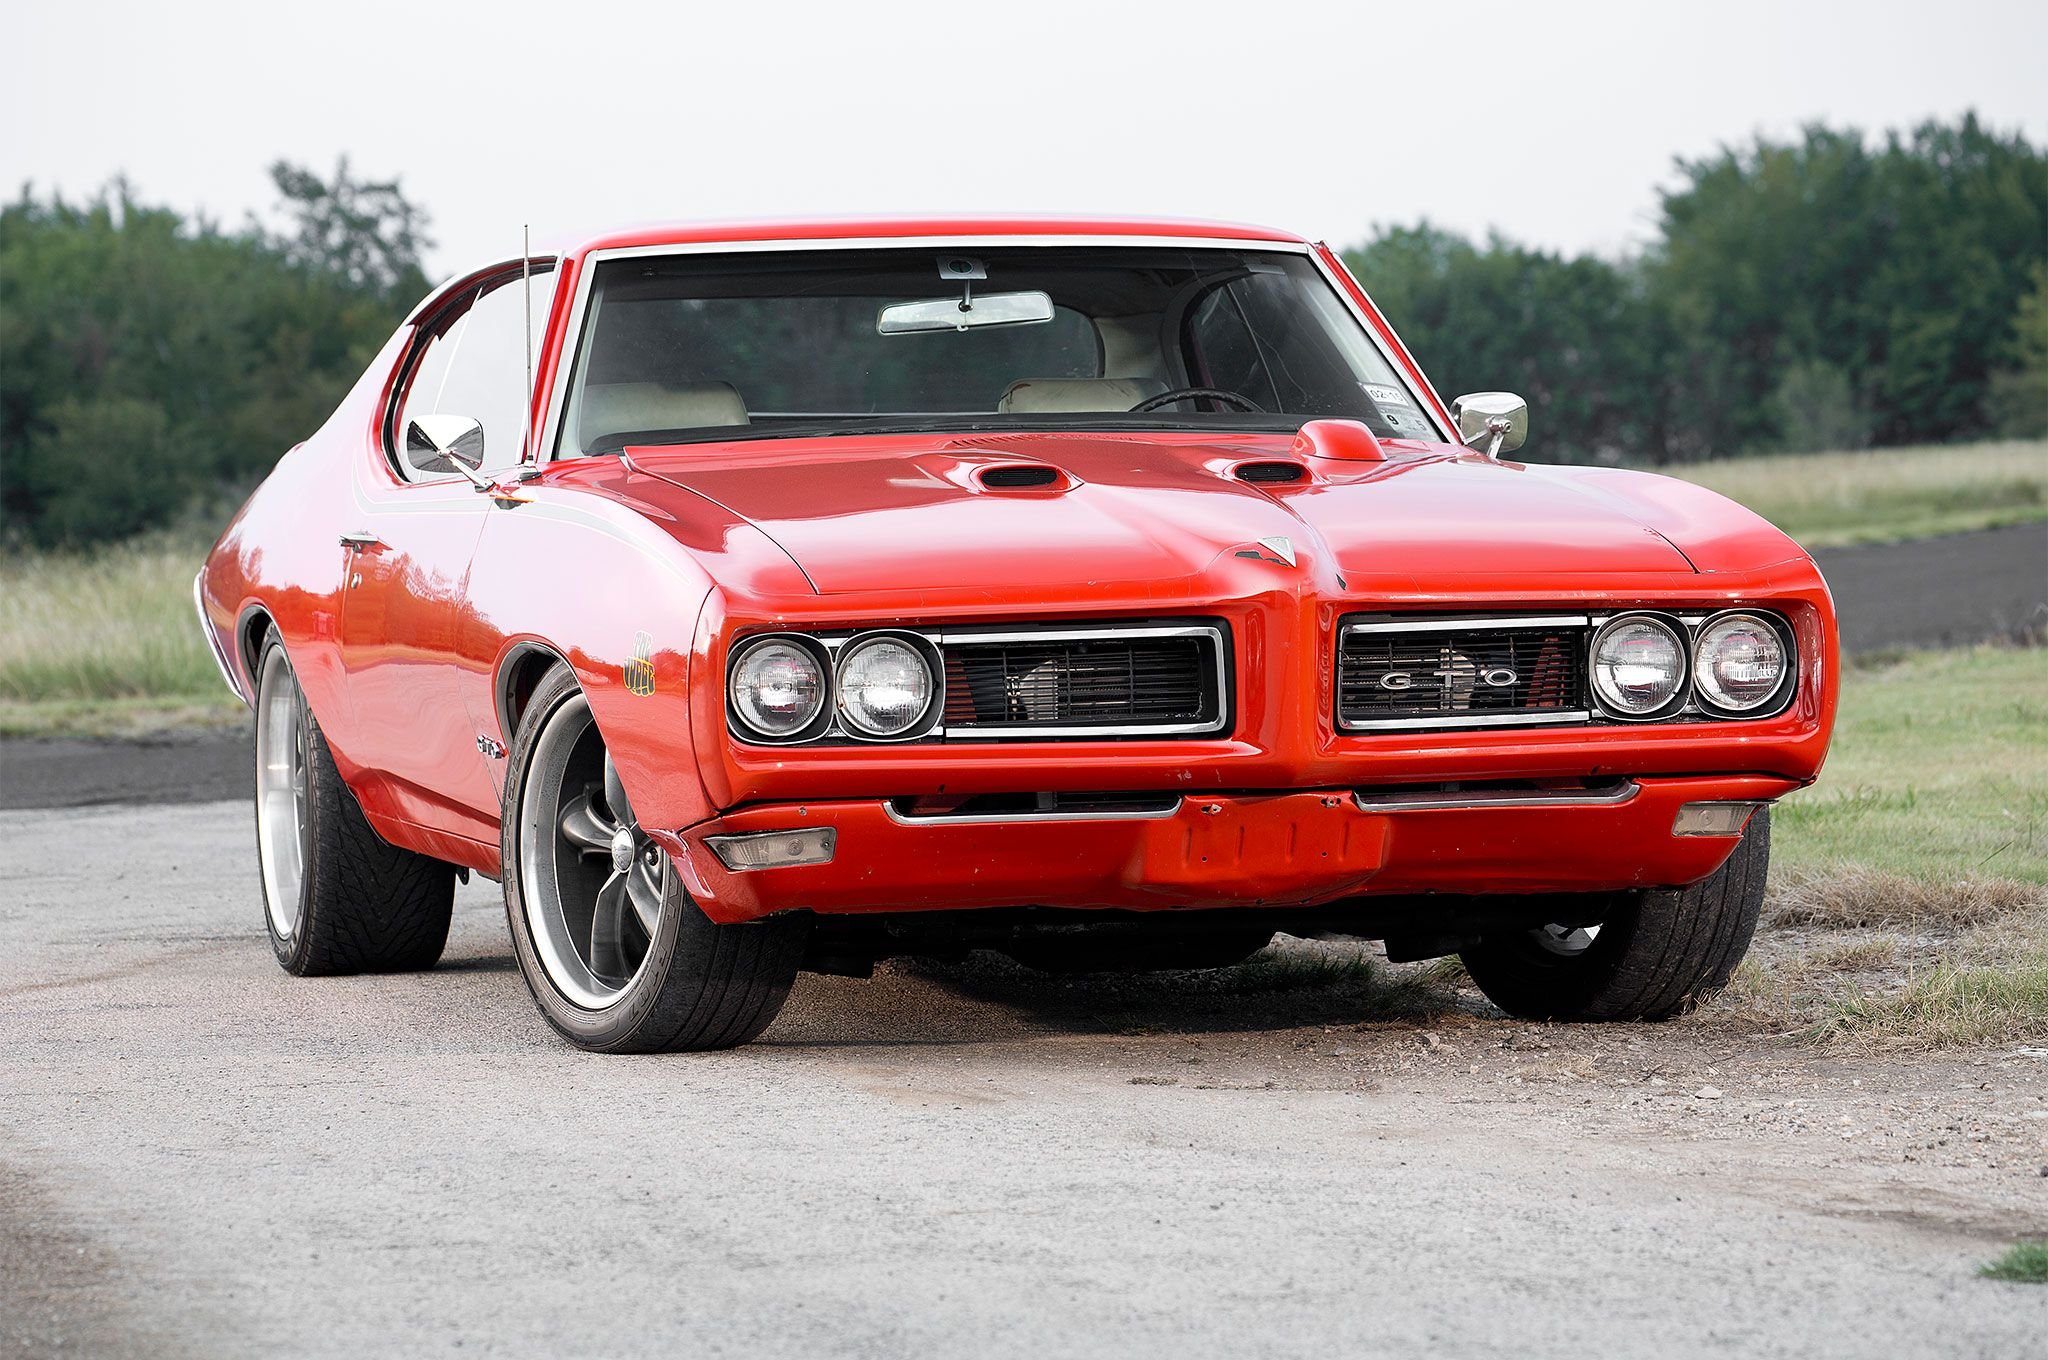 Pontiac, Gto, Street, Legal, Classic, Cars, The, Judge Wallpaper HD / Desktop and Mobile Background